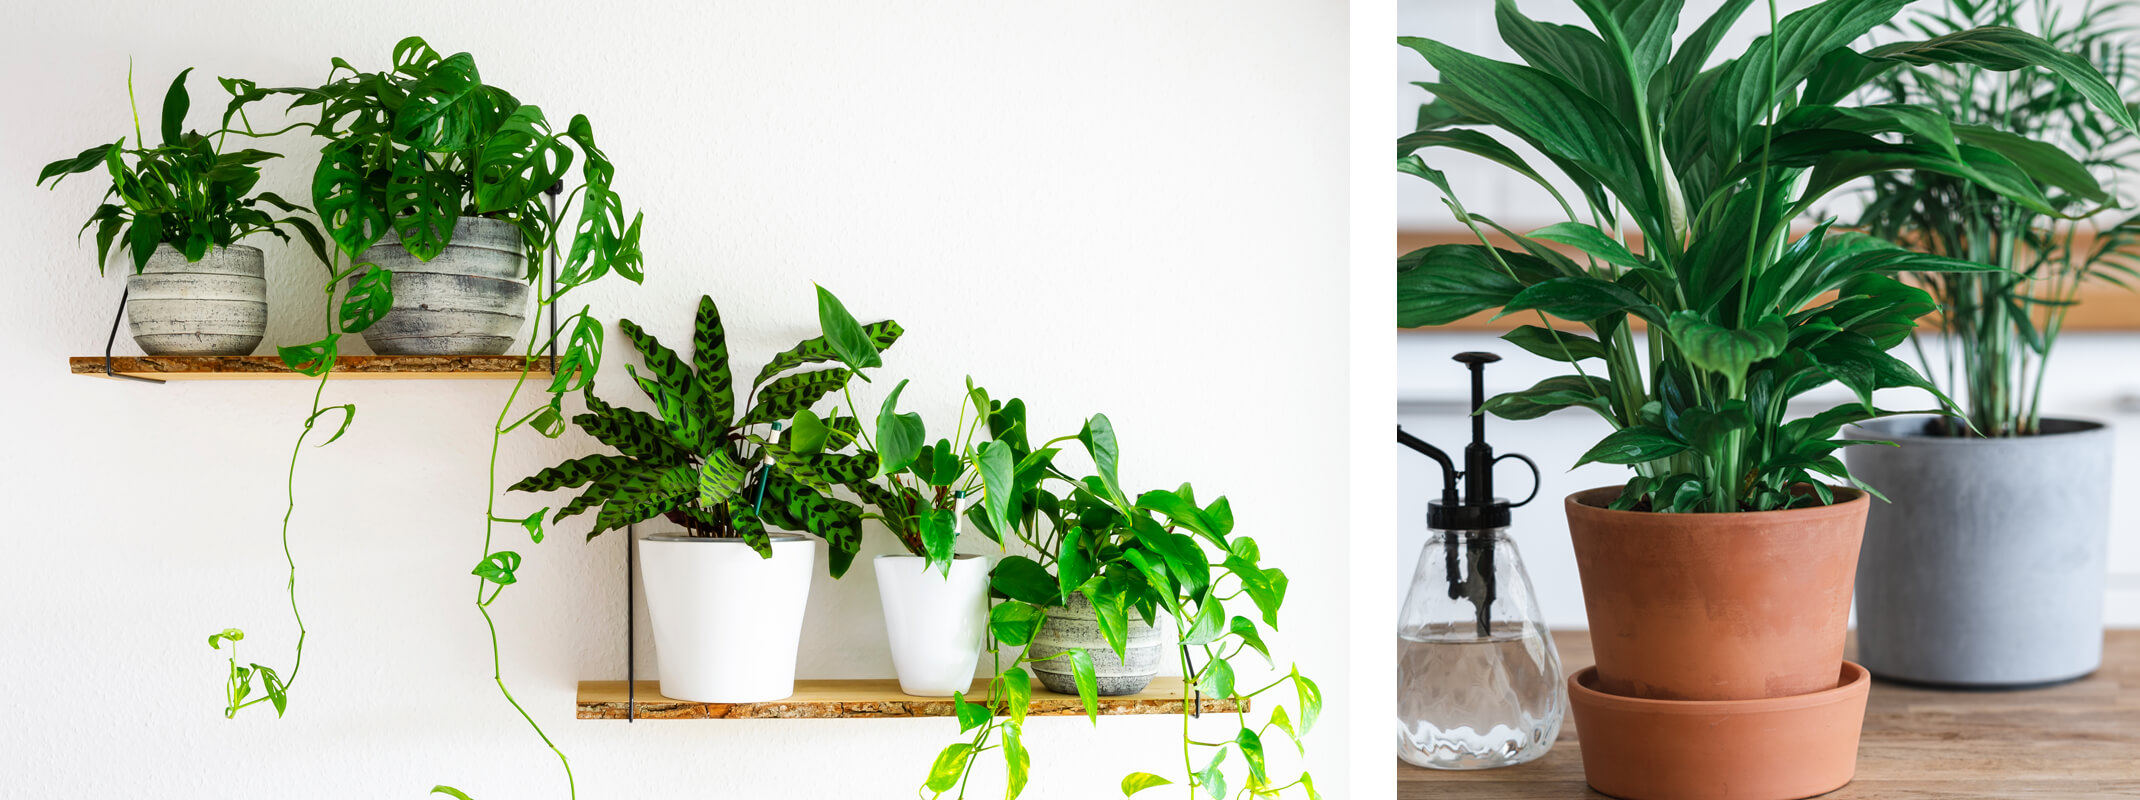 two images of houseplants with the first showing a variety of houseplants on floating shelves and a second image of a peace lily houseplant and a second houseplant potted on a table